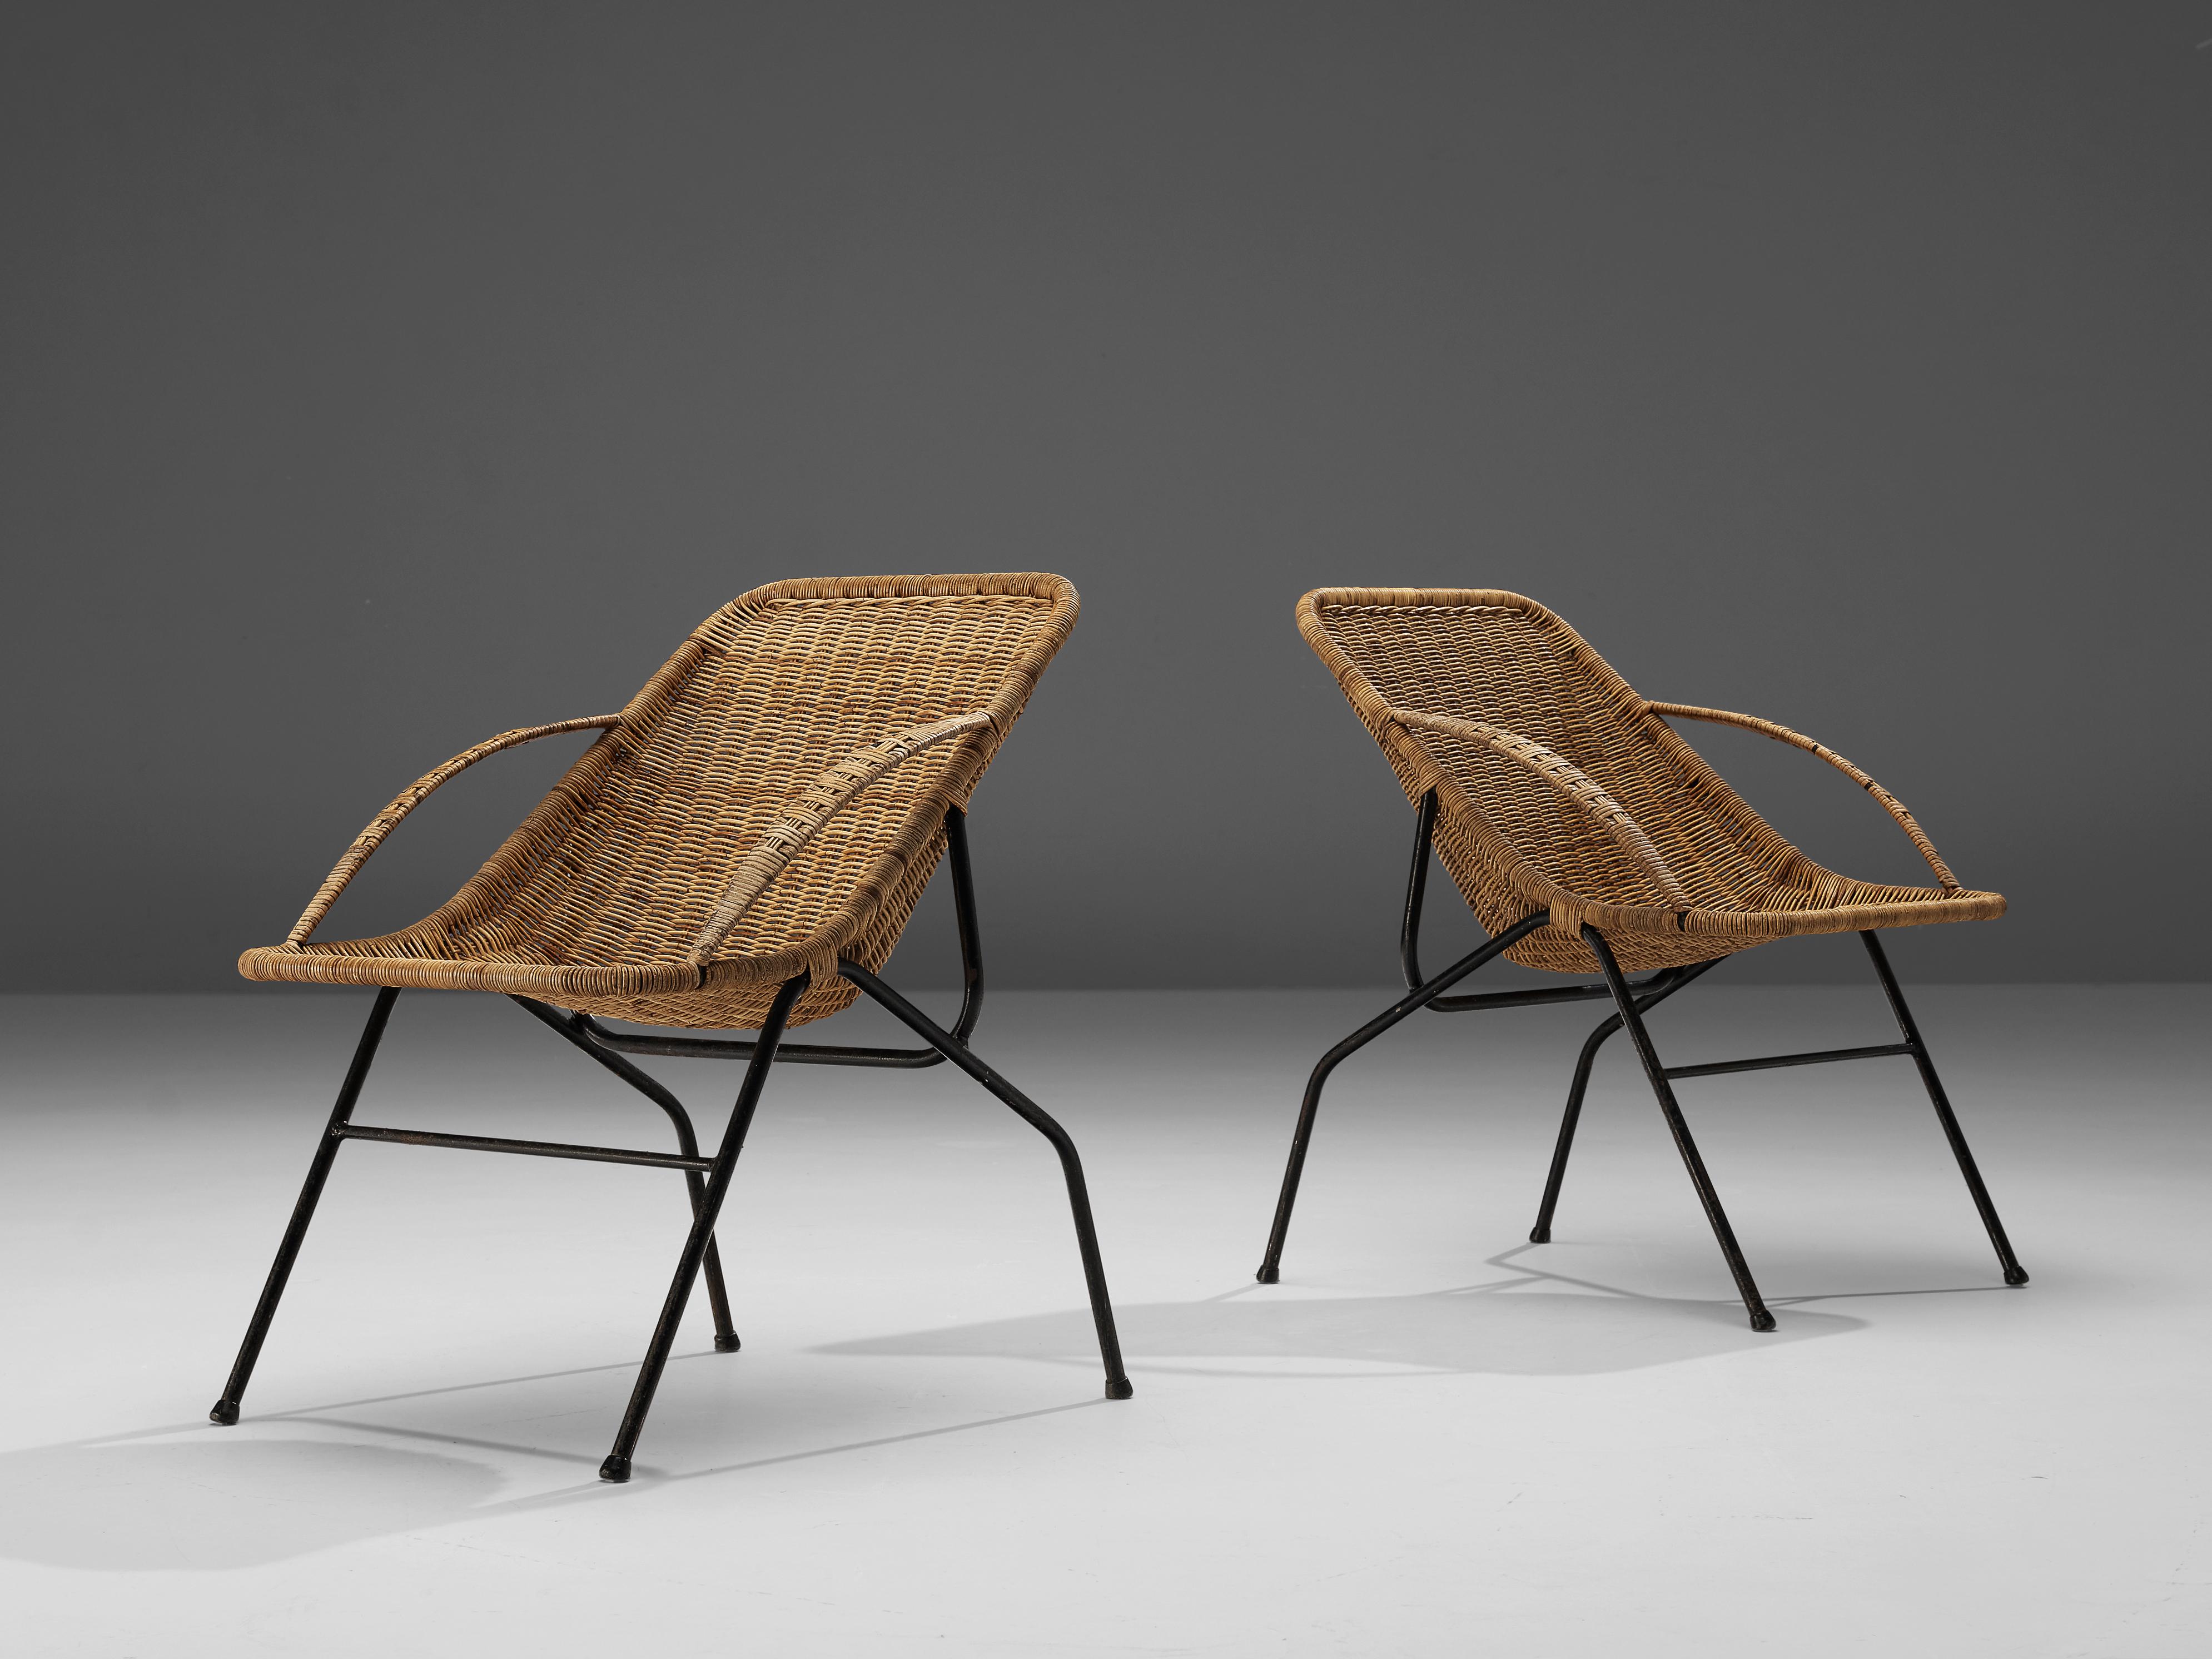 Armchairs, rattan, cane and black coated metal, France, 1950s. 

This pair of cane chairs are executed with a rattan shell with two woven cane armrests. The seat are slightly tilted. The frame is black and sculptural and the chairs show strong